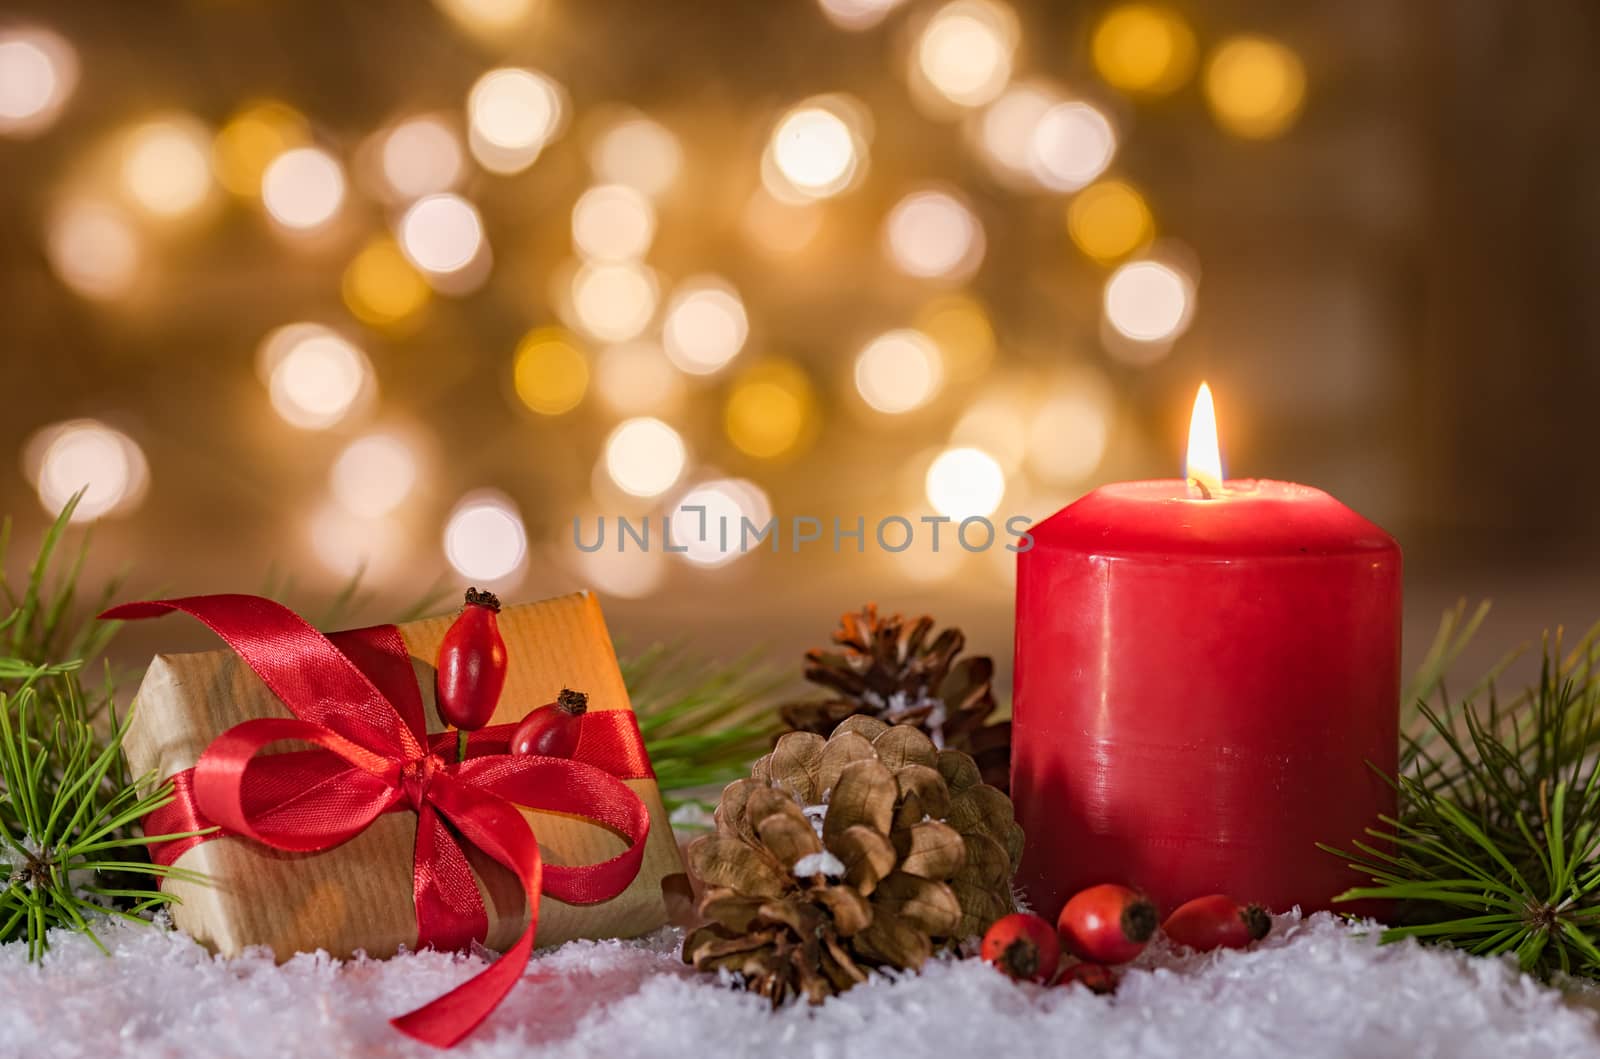 Merry Christmas decoration advent with gift and burning red candle blurred background 